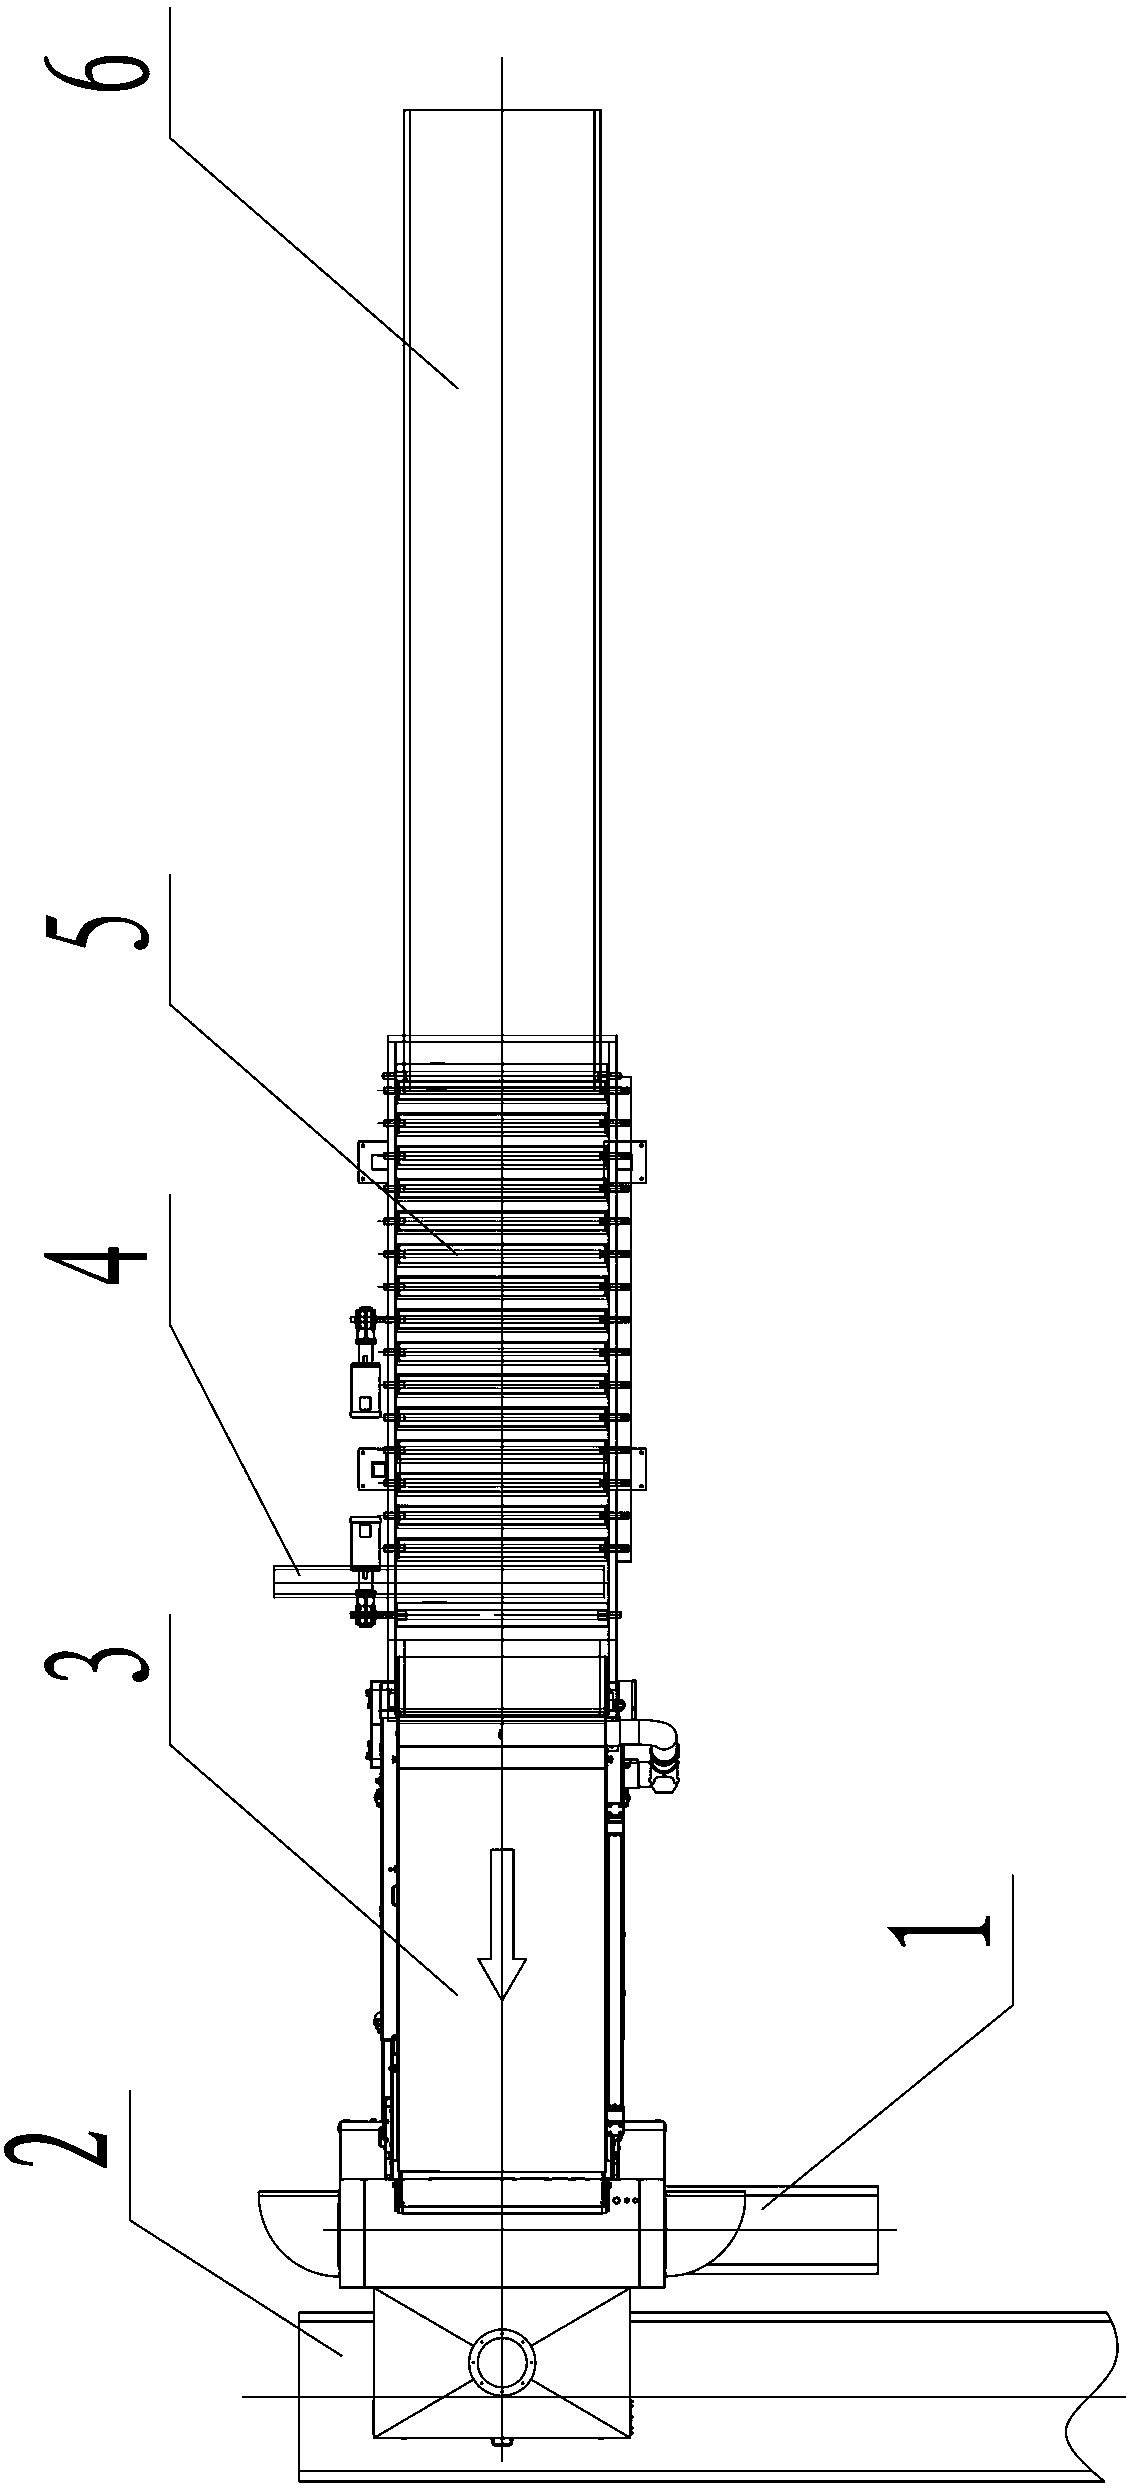 Device capable of improving sundry removing efficiency of tobacco sundry removing machine